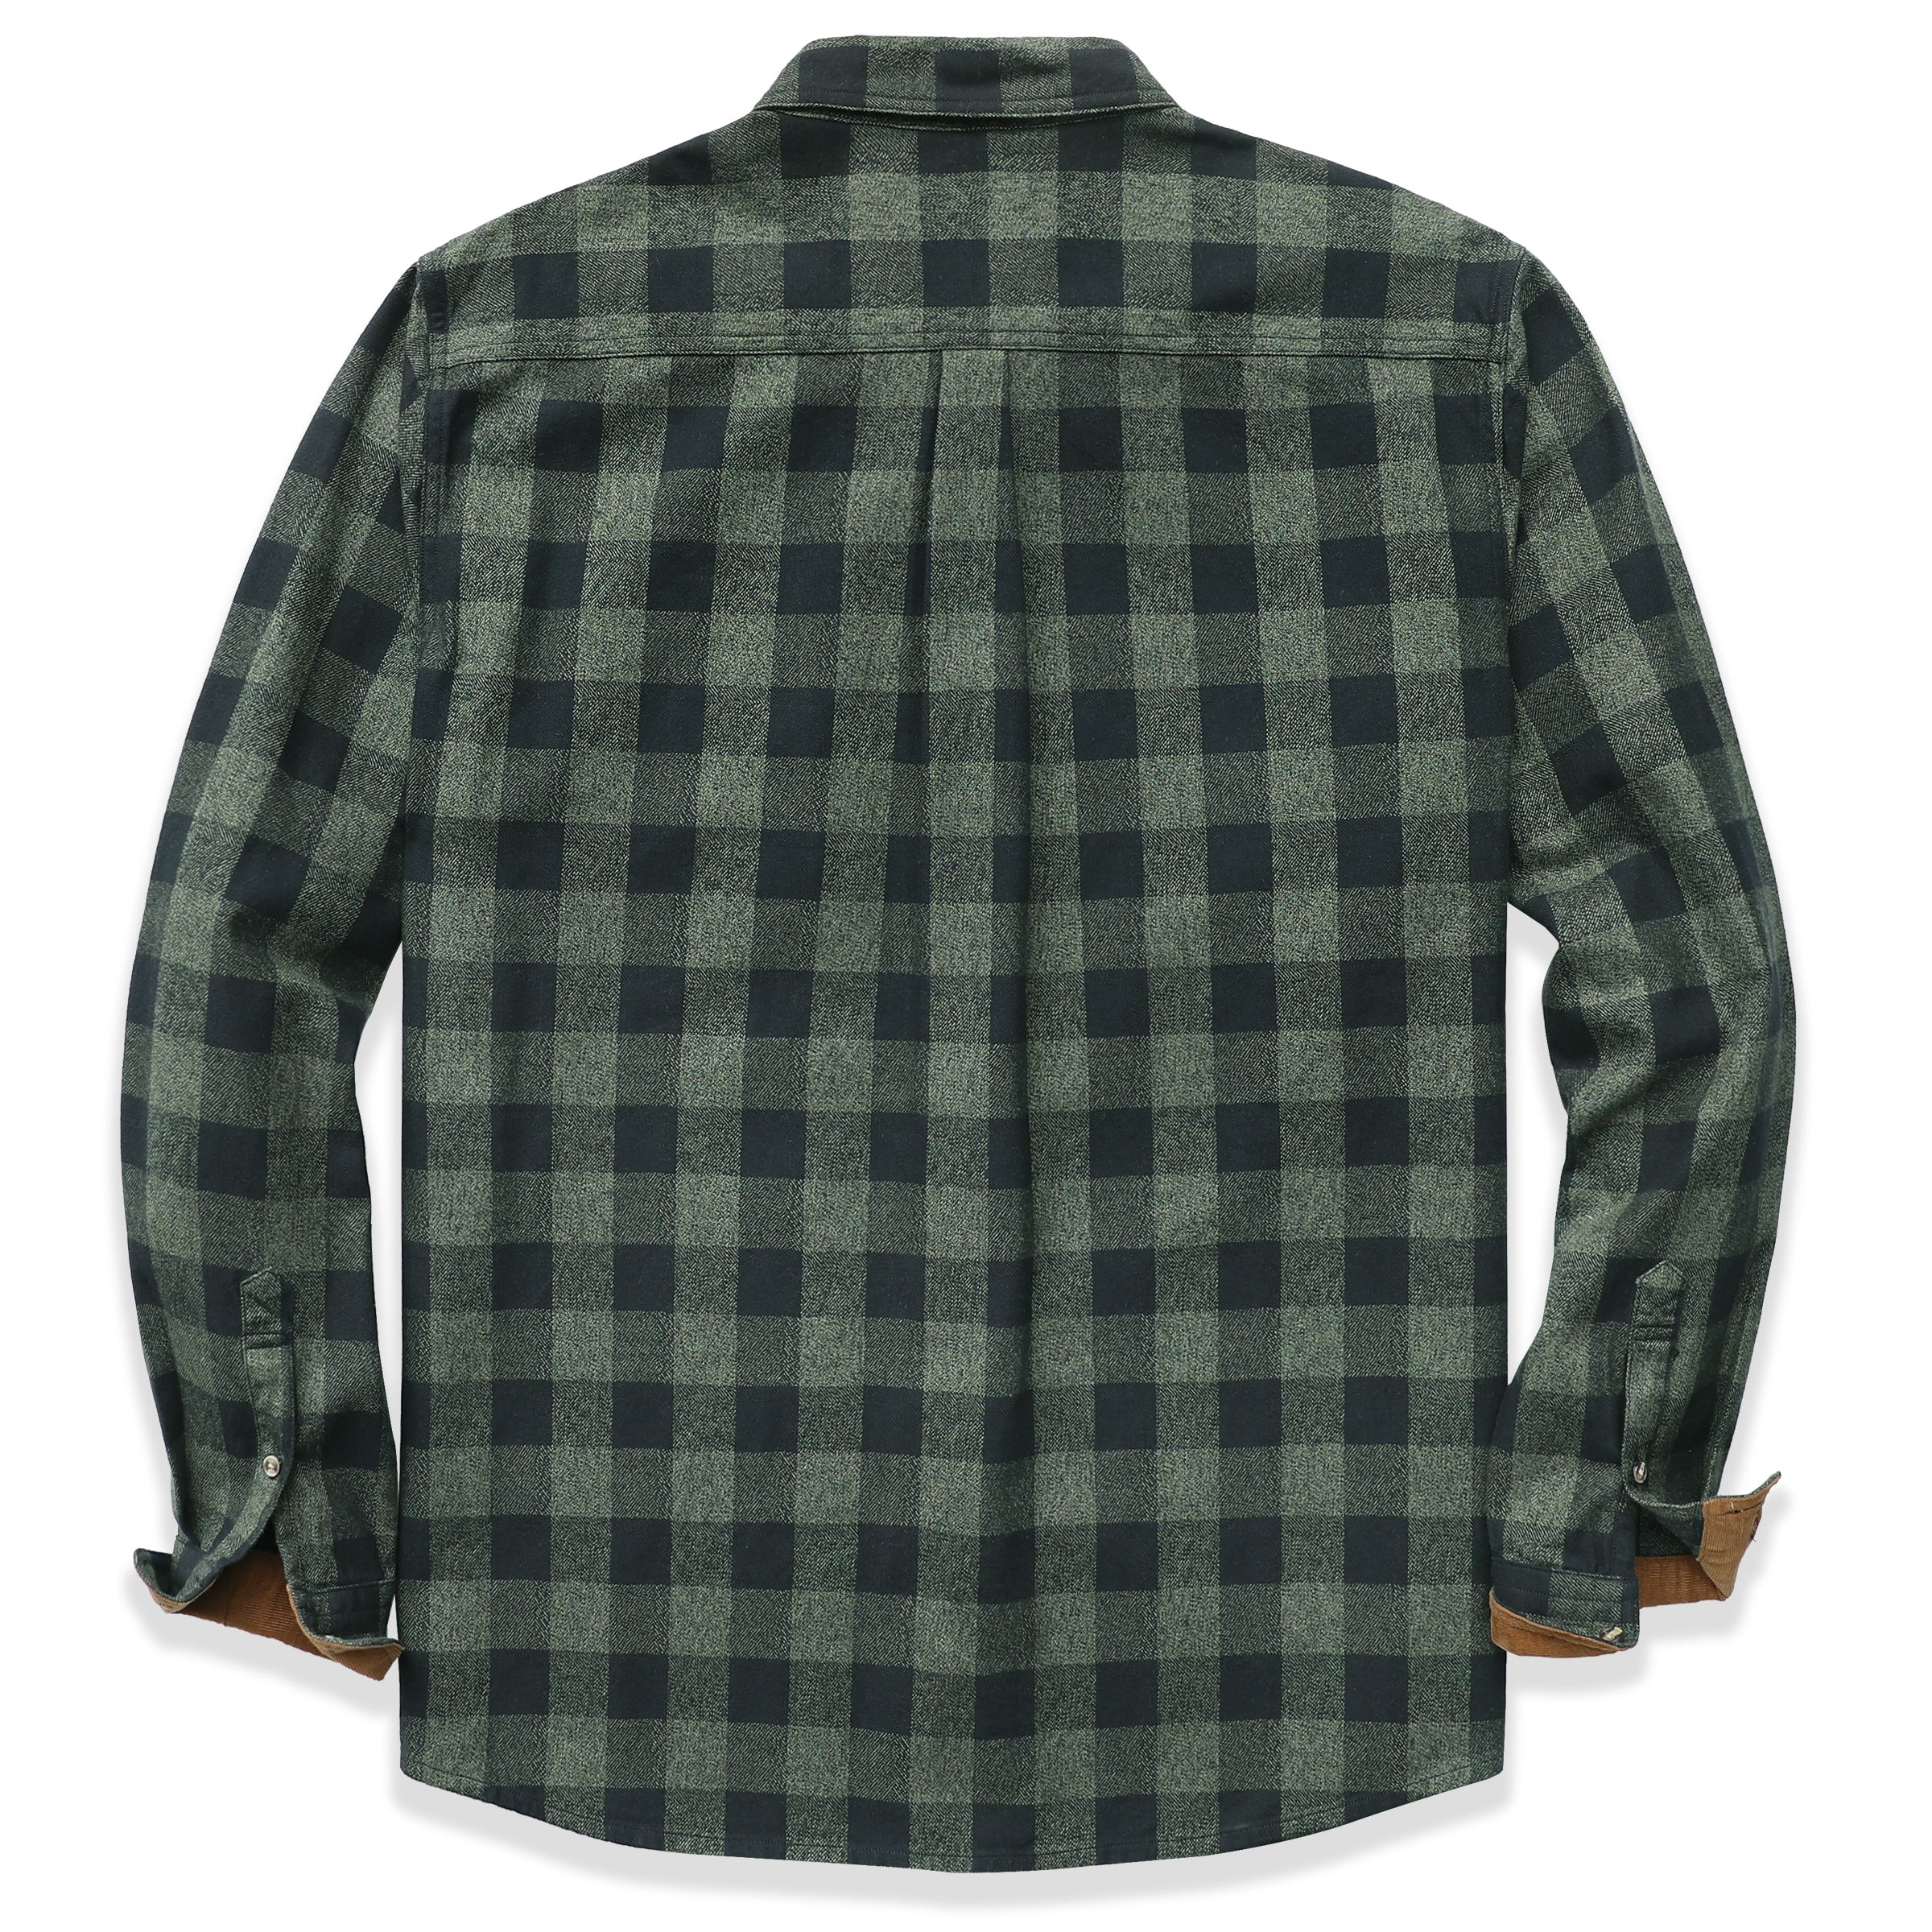 Mens Flannel Shirts Long Sleeve Flannel Shirt for Men Casual Button Down Brushed 100% Cotton Shirt #1018